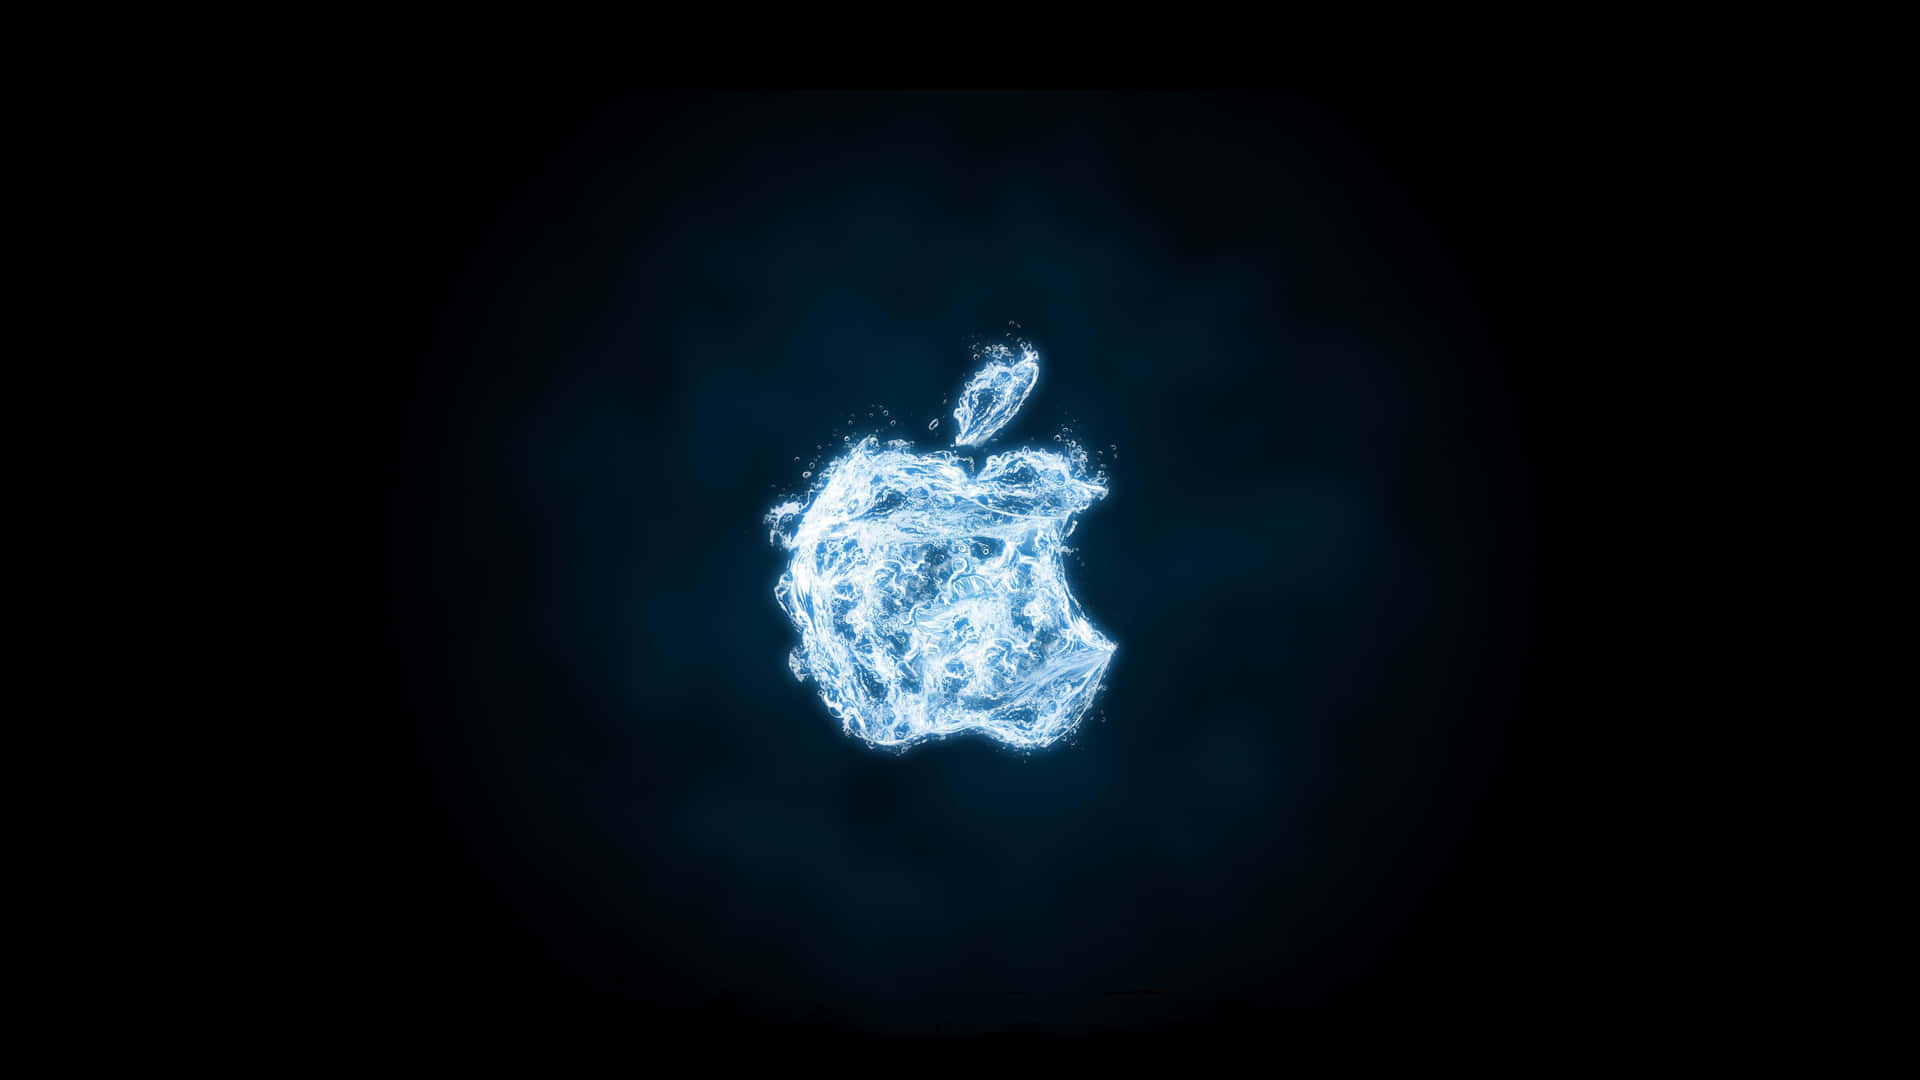 Apple Logo In Blue Flames On A Black Background